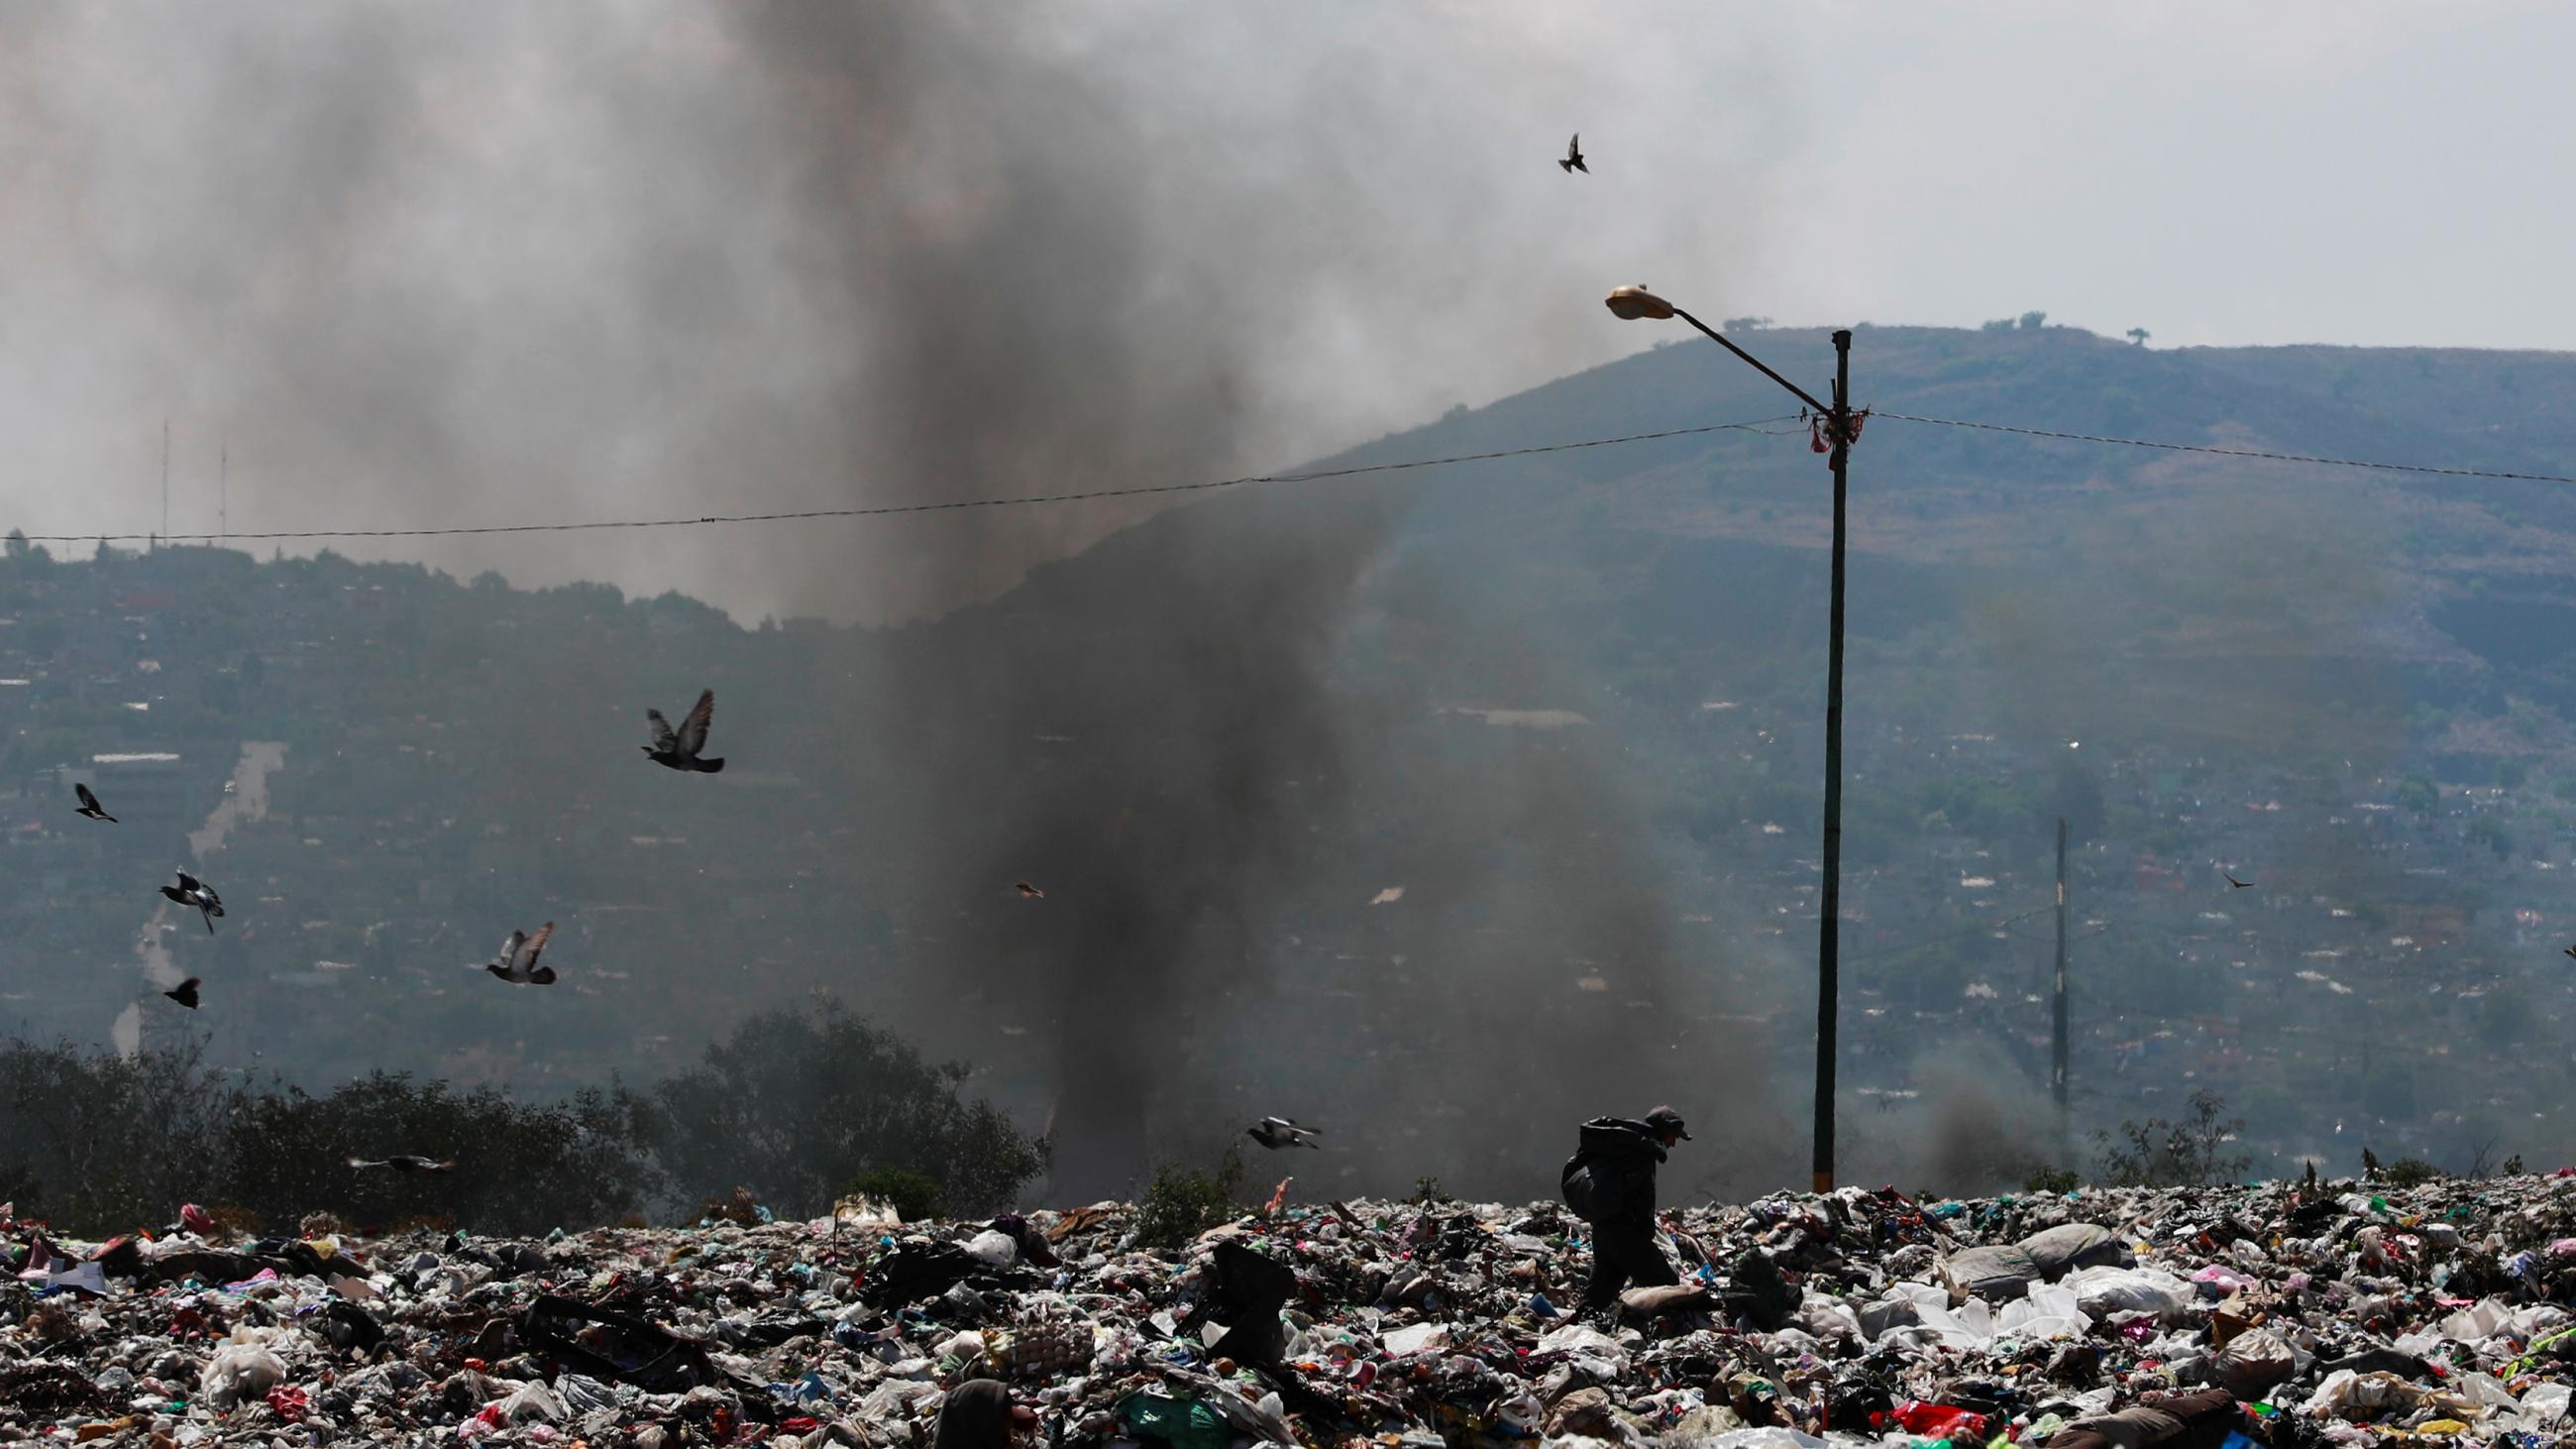 A man works on a garbage dump as black smoke rises in the background on the outskirts of the city, as the coronavirus disease (COVID-19) continues in Mexico City, Mexico, on April 27, 2020.